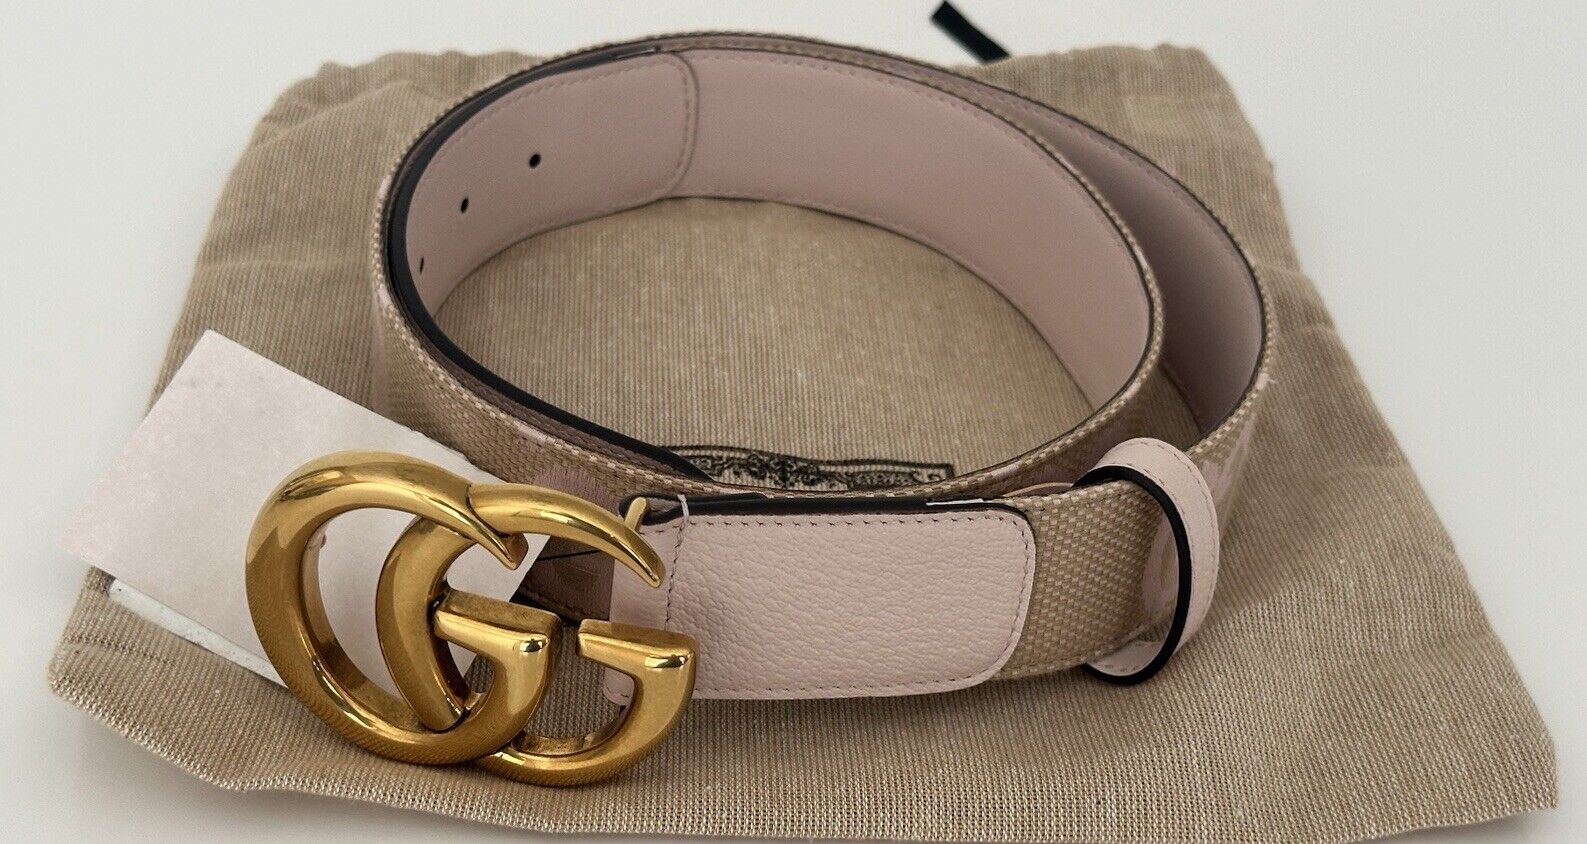 Gucci Women's GG Marmont Wide Belt in Pink Canvas/Leather 95/38 Italy 400593 NWT